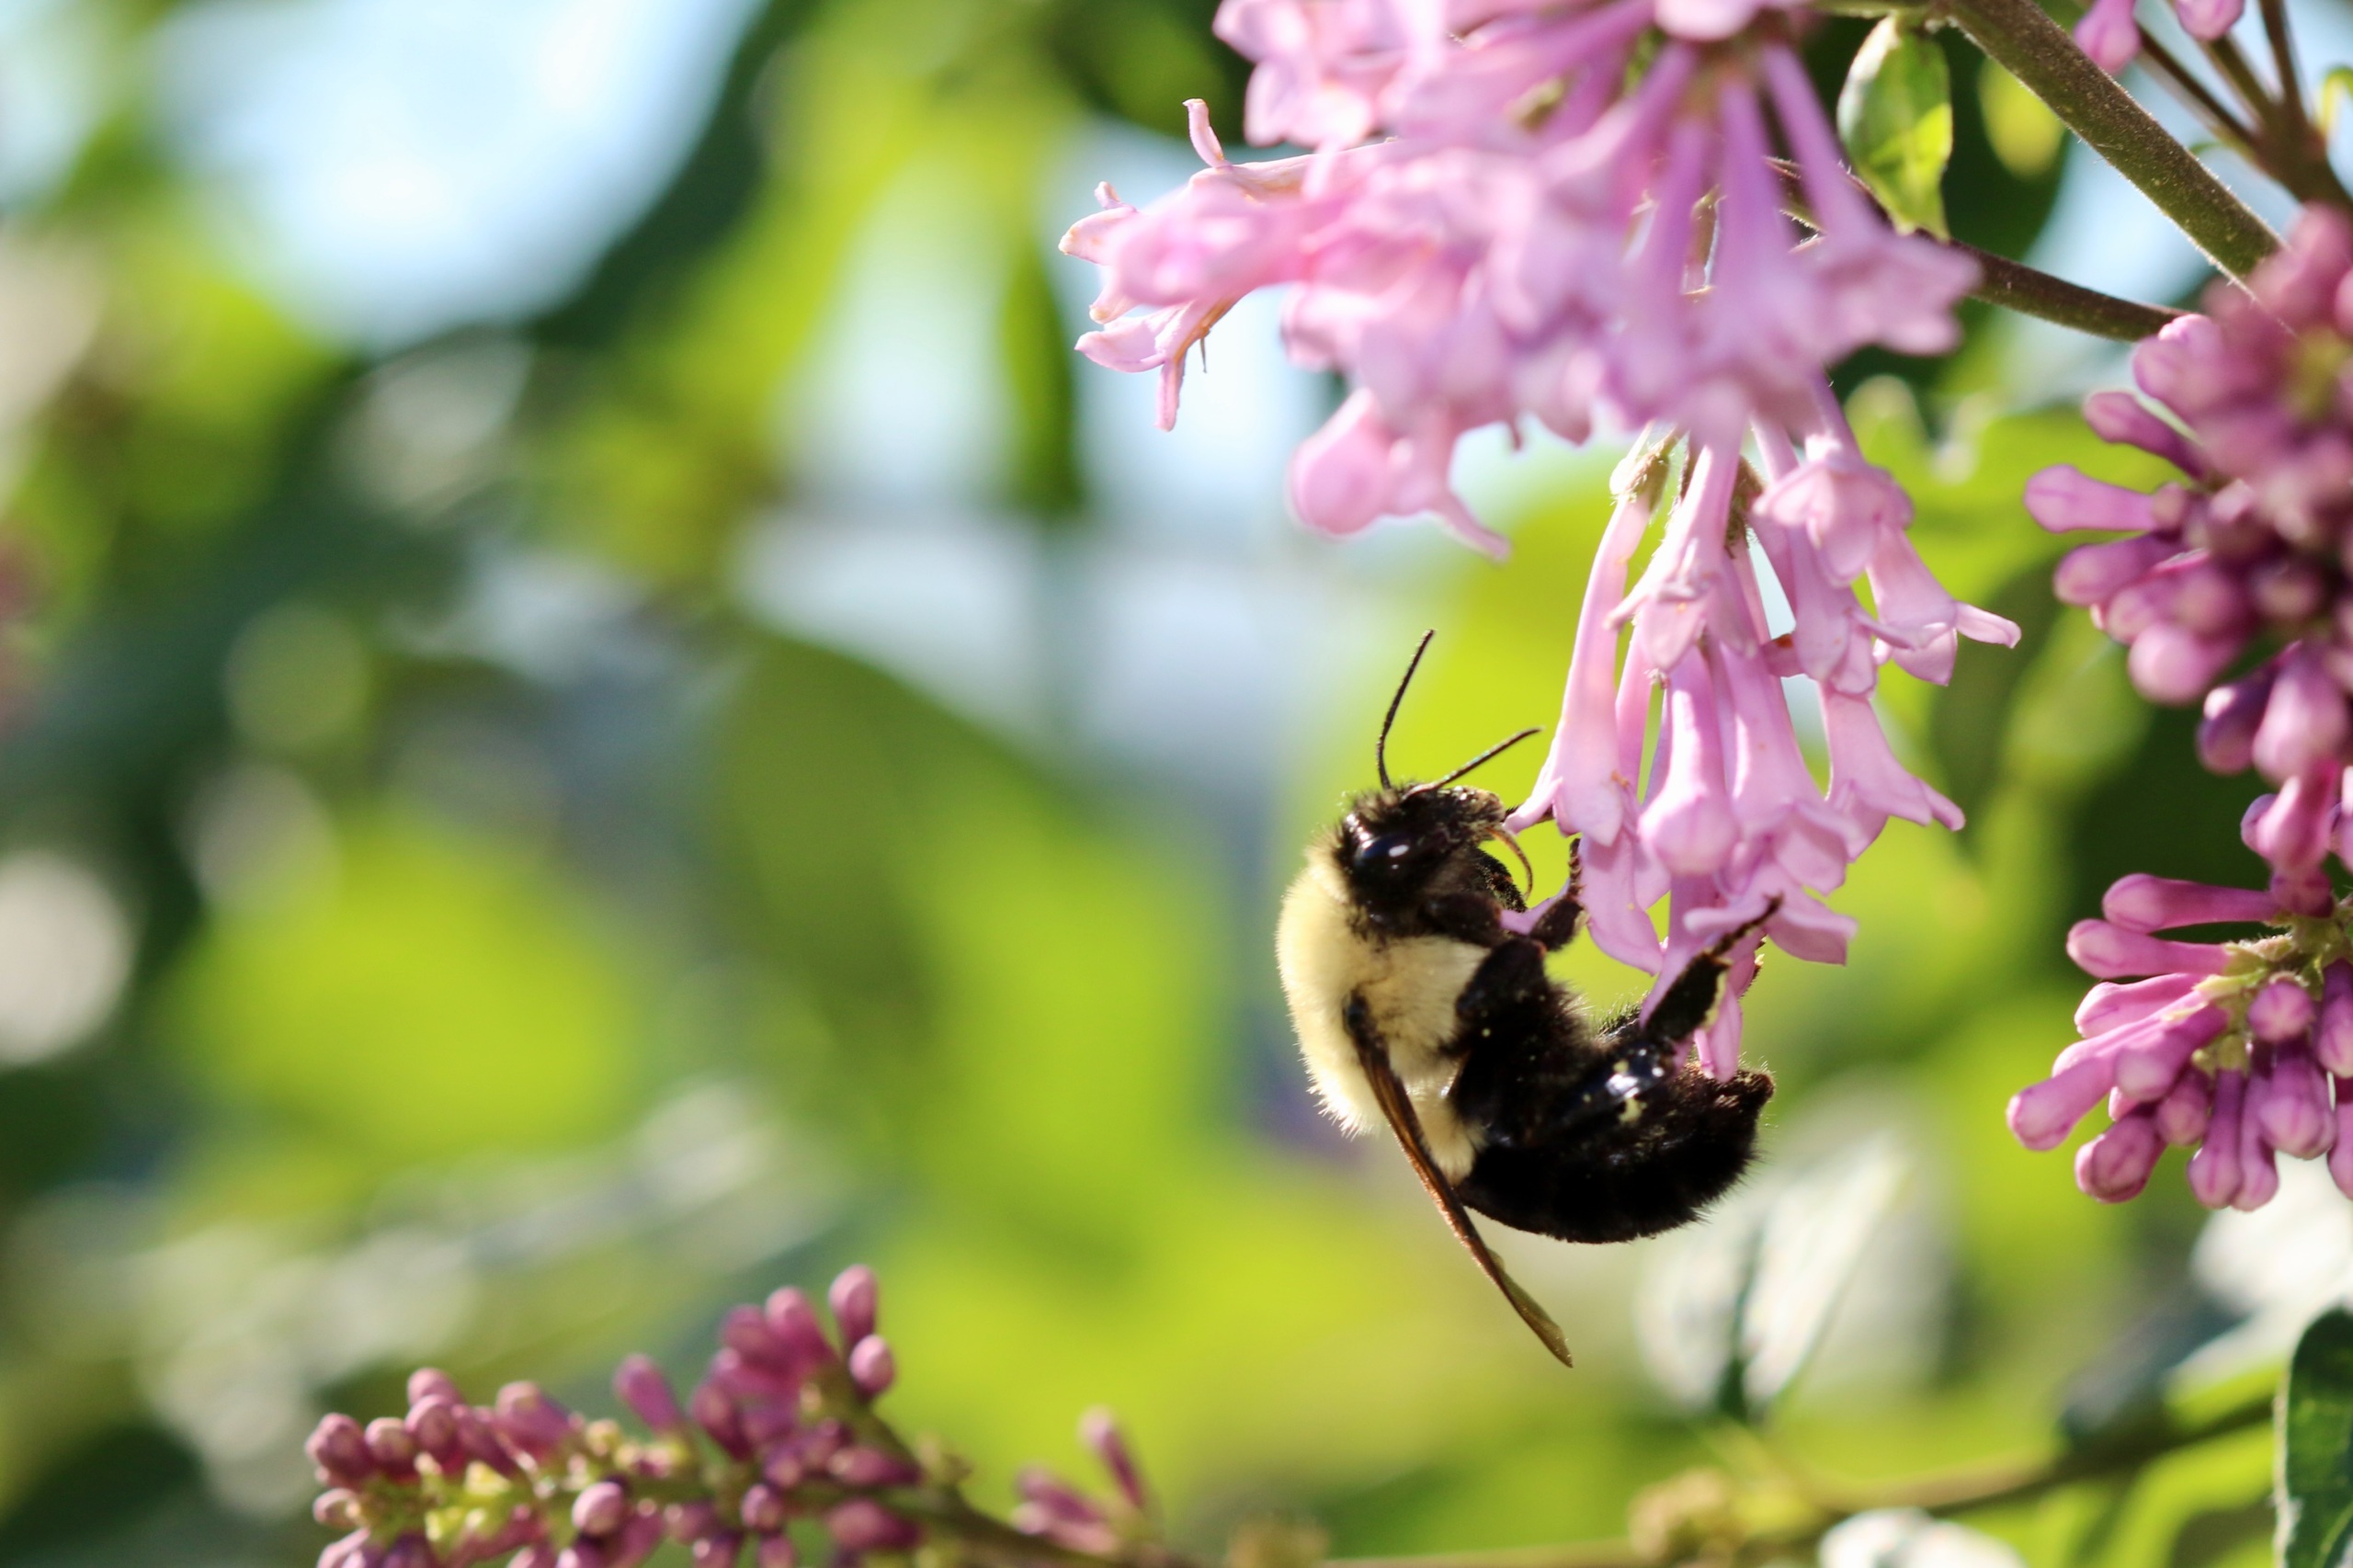 Why we should save the bees, especially the wild bees who need our